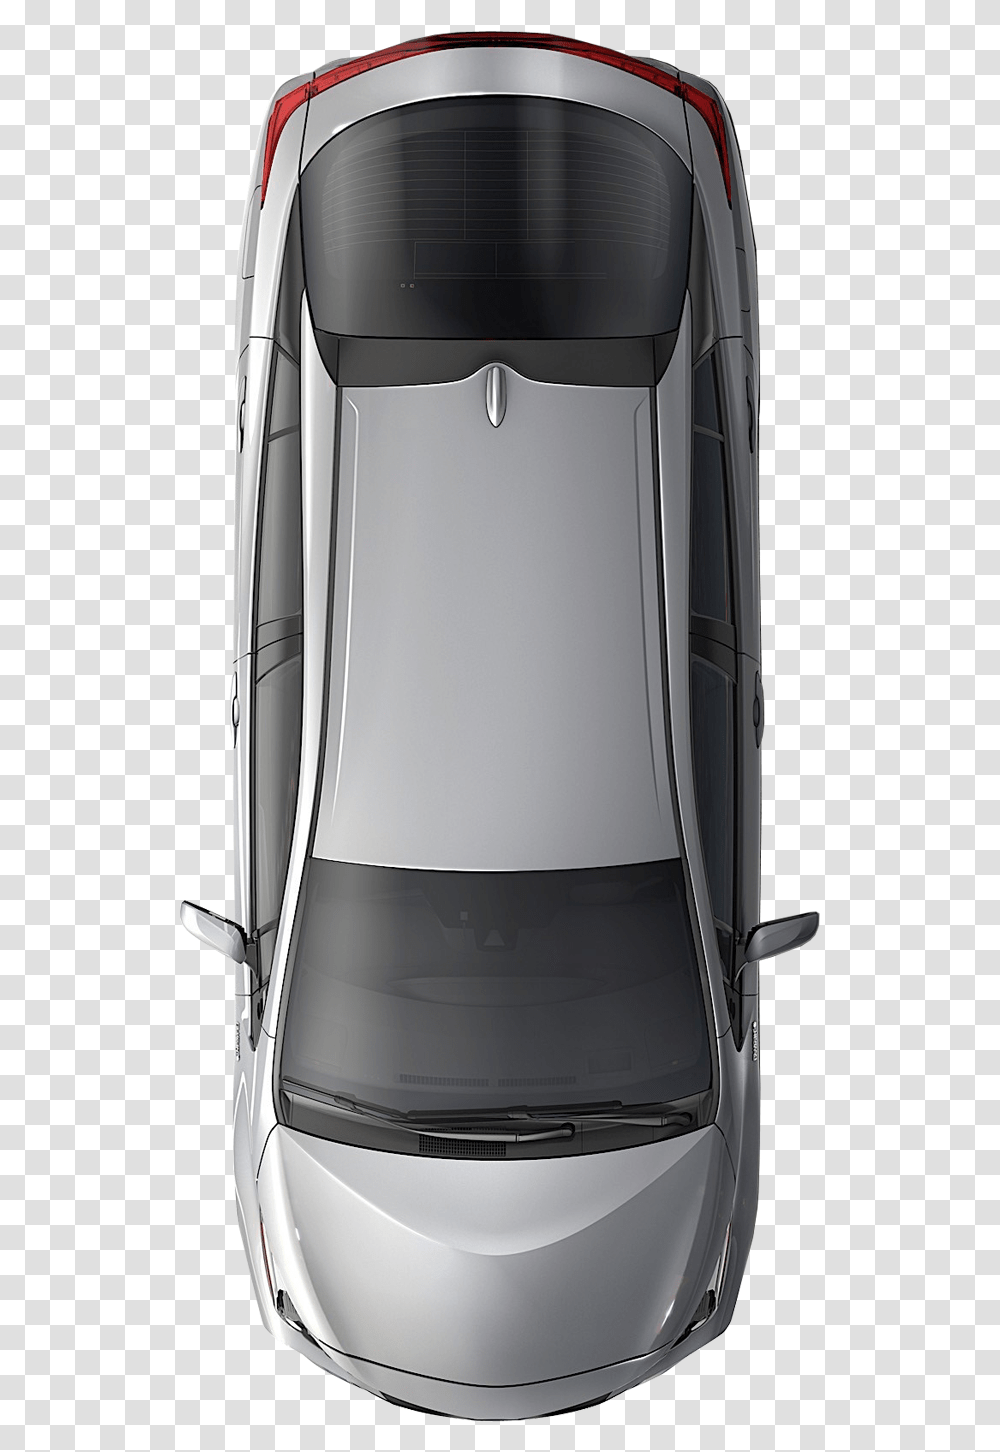 Open Top Car Clipart Images In Toyota C Hr Top View Toyota Chr Top View, Electronics, Mixer, Appliance, Phone Transparent Png